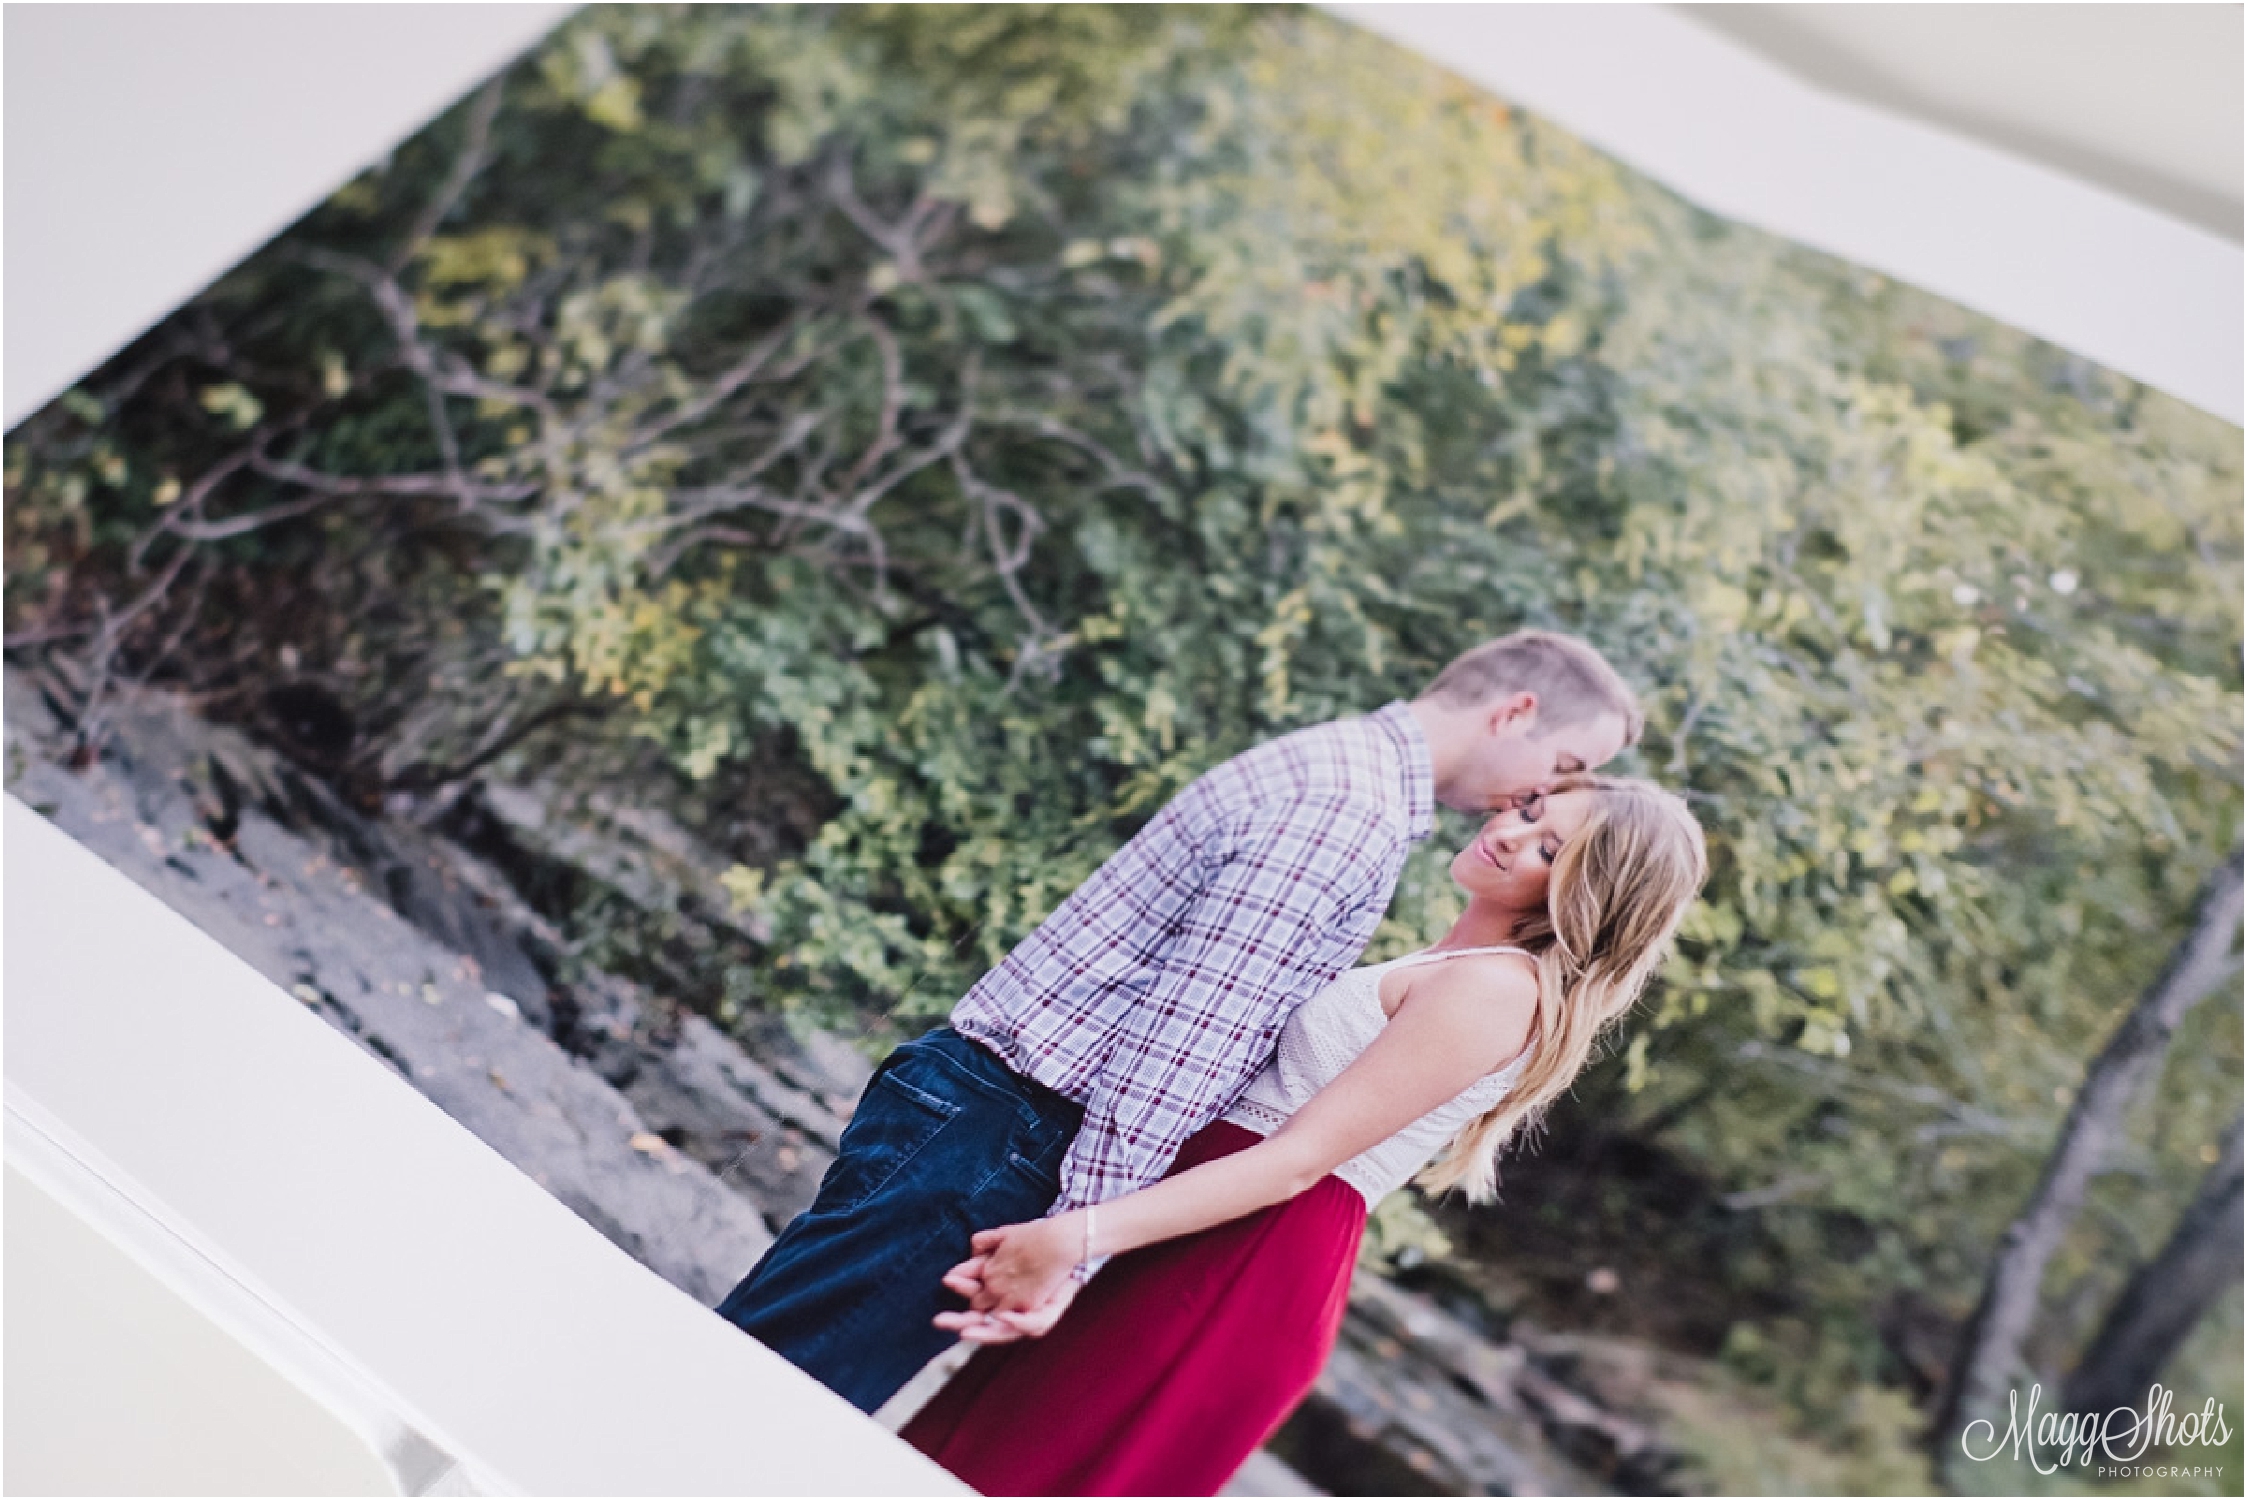 Albums and Guestbooks, Wedding Album, Guestbook, Engagement, Wedding, Blog, Bride and Groom Tips, Love, Portraits, Wedding Photography, Wedding Photographer, Professional Photography, Professional Photographer, MaggShots Photography, MaggShots